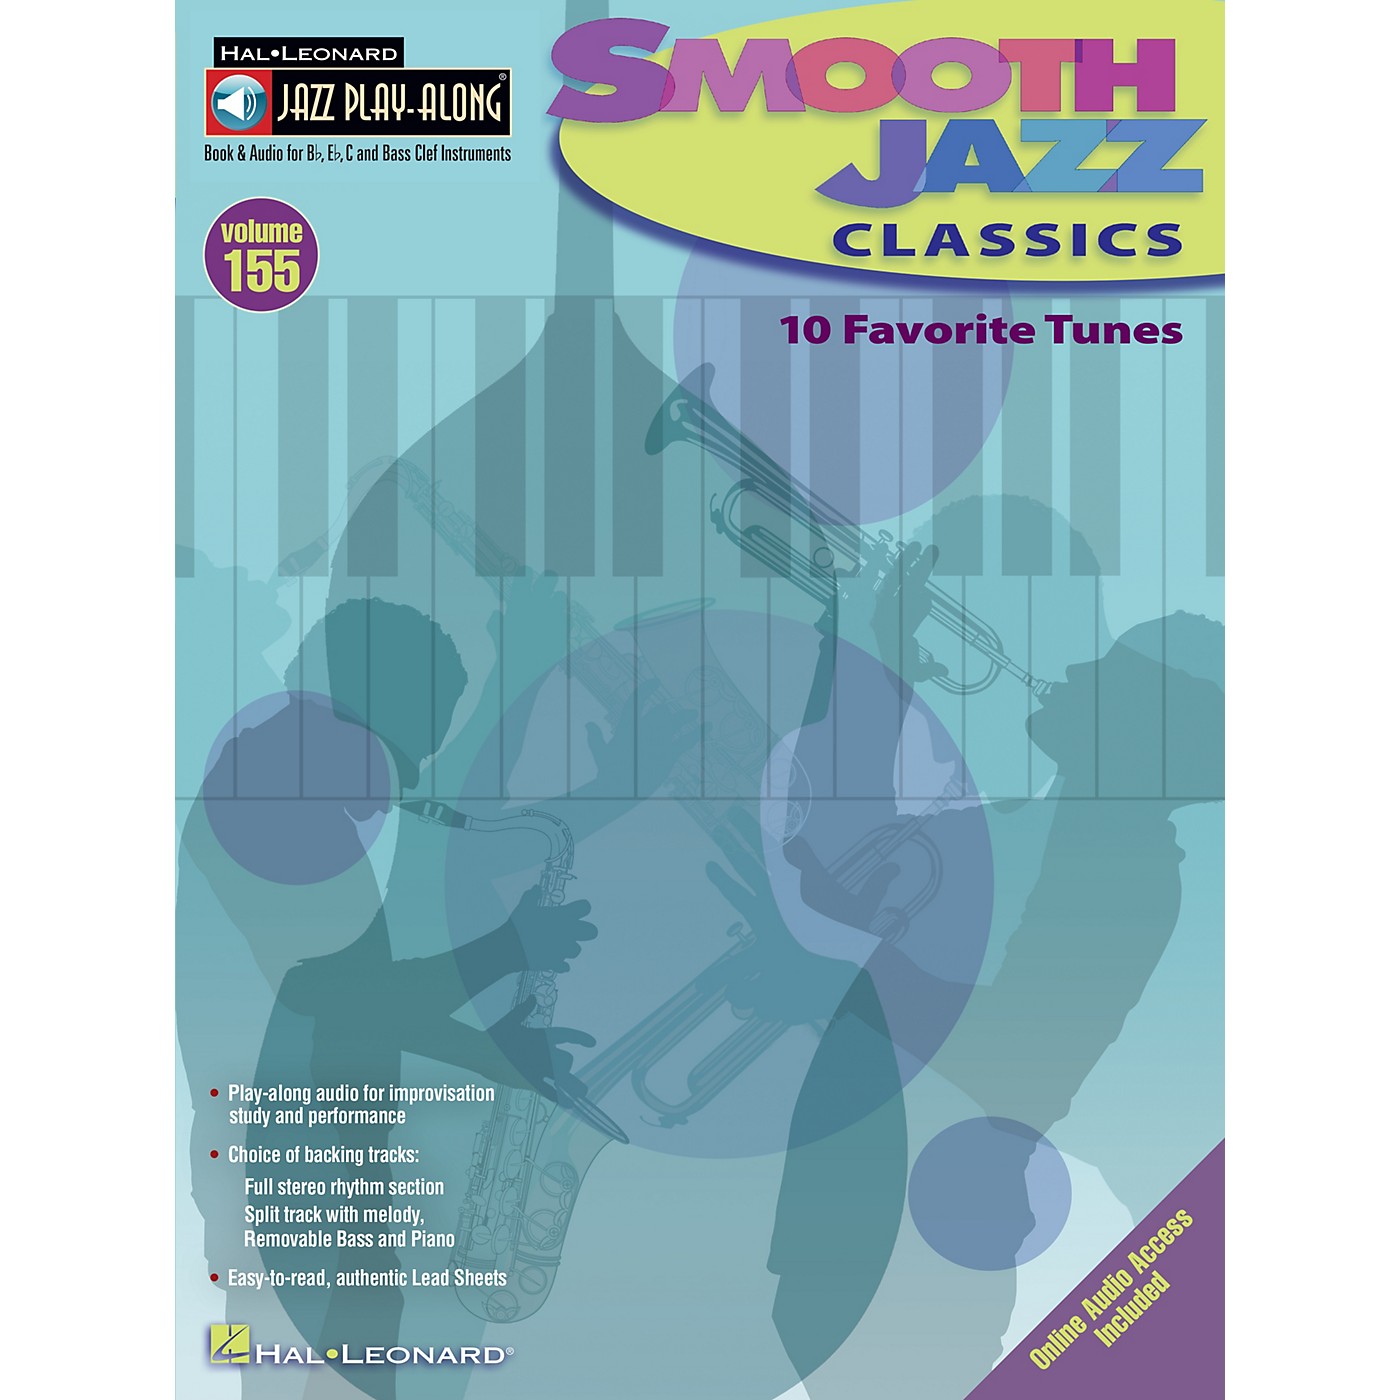 Hal Leonard Smooth Jazz Classics (Jazz Play-Along Volume 155) Jazz Play Along Series Softcover with CD thumbnail